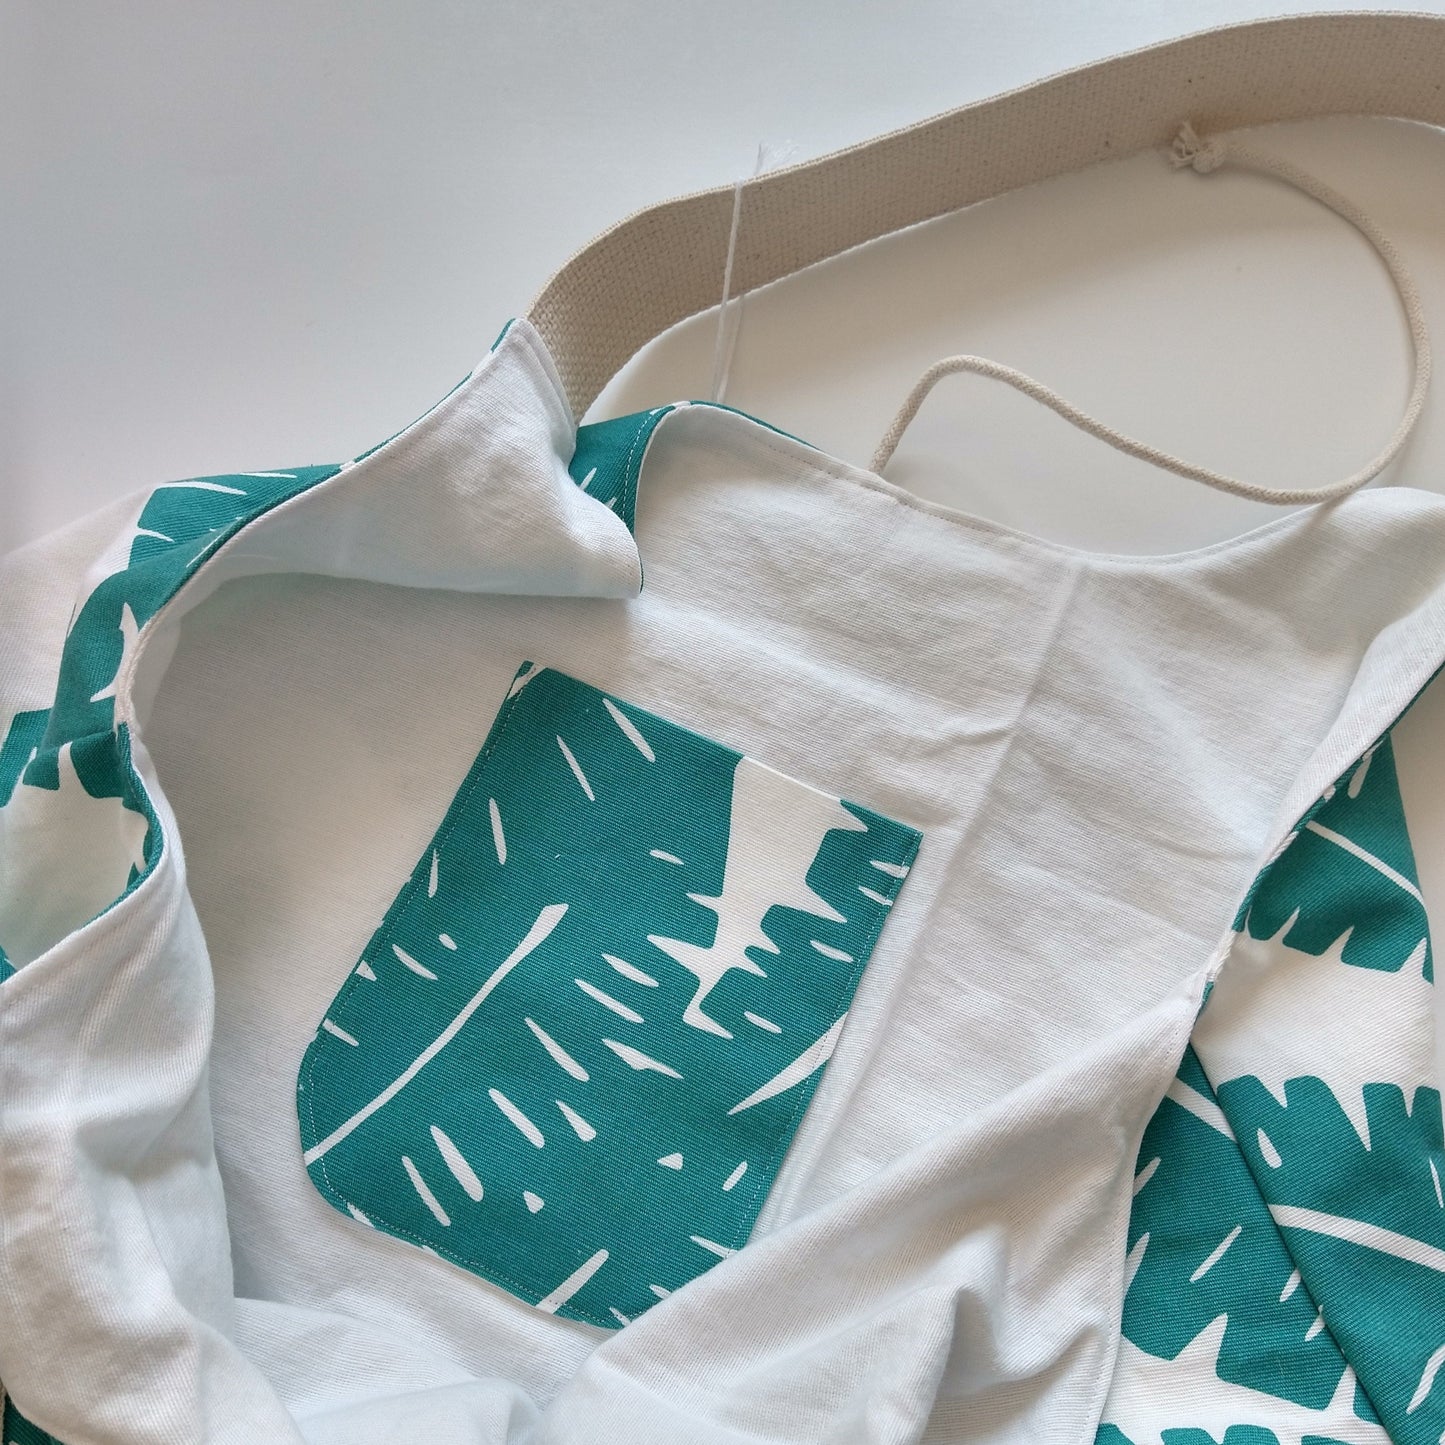 Shopping/beach bag, reversible, size large, turquoise beach palms (Handmade in Canada)